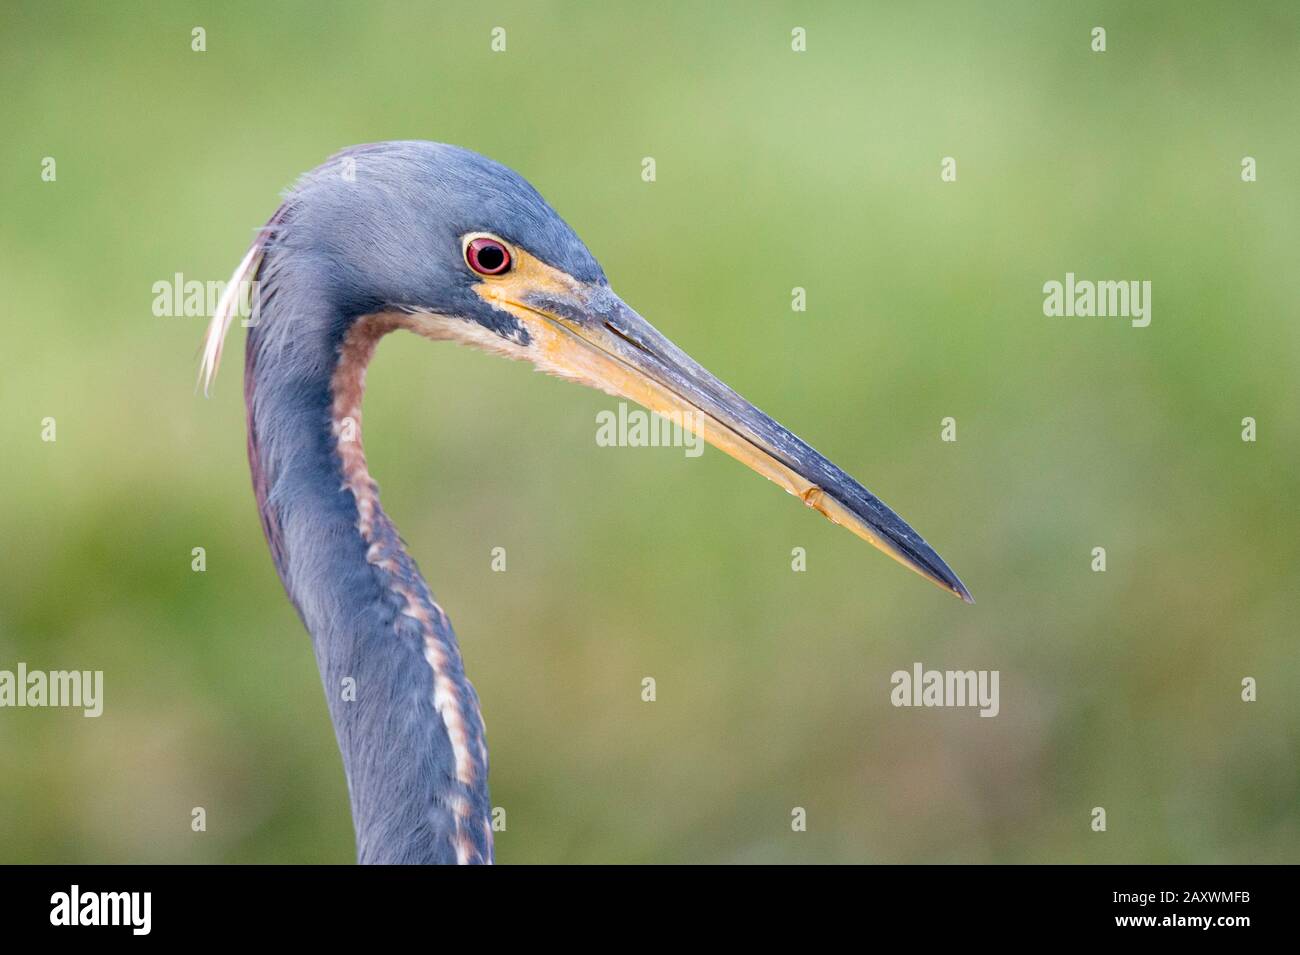 A close-up detailed photo of a Tricolored Heron portrait with a smooth green grass background in soft light. Stock Photo